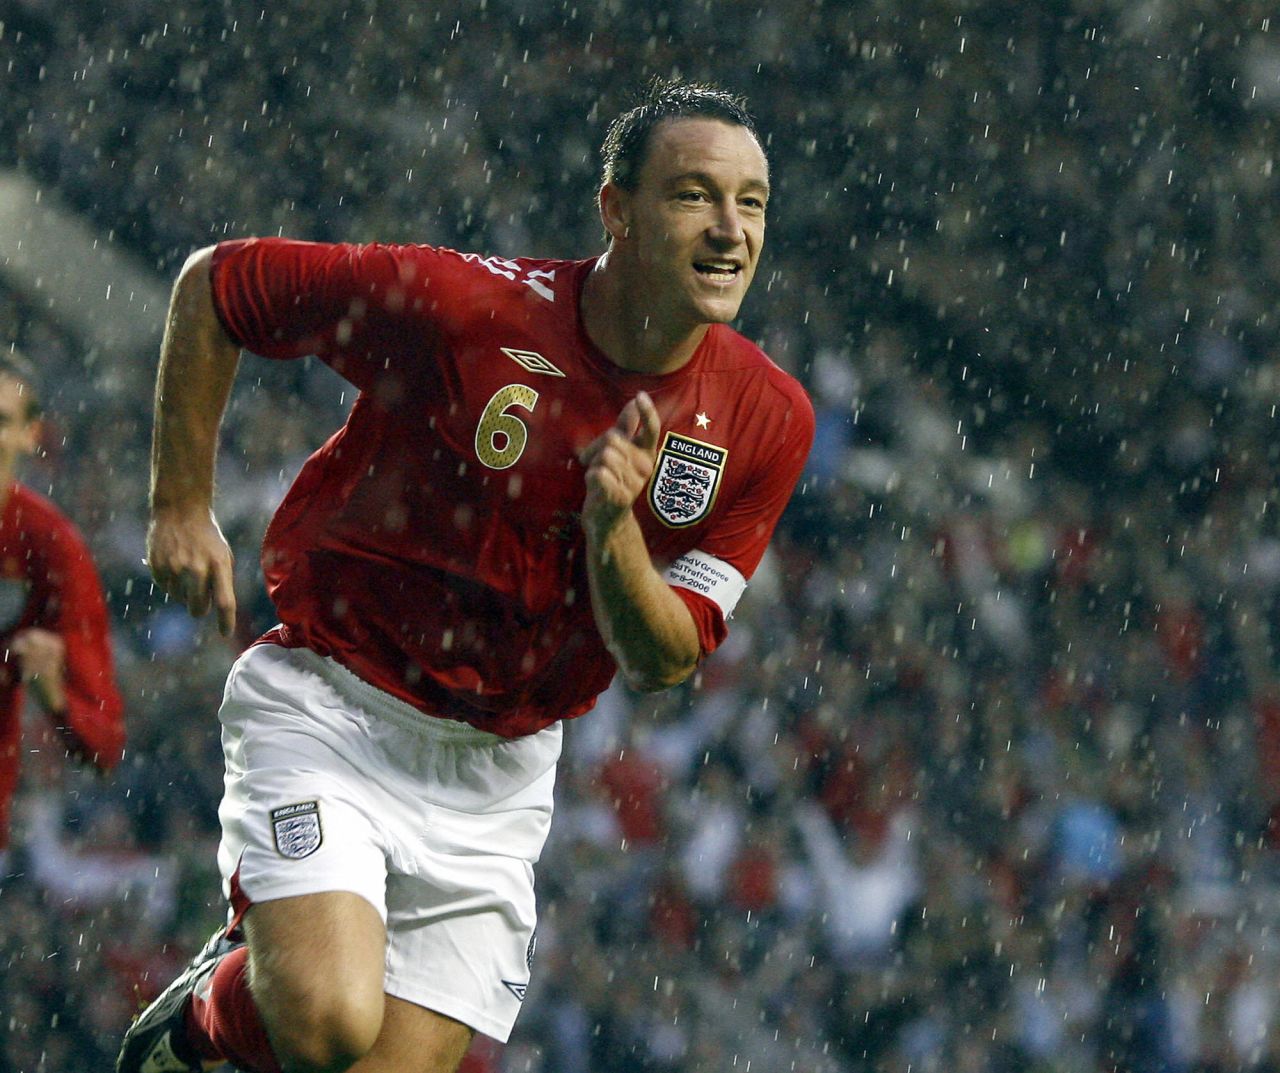 Terry's international profile continued to grow and he was named England captain by new manager Steve McClaren in 2006. He scored the opening goal in his first match as skipper, a 4-0 victory over Greece.